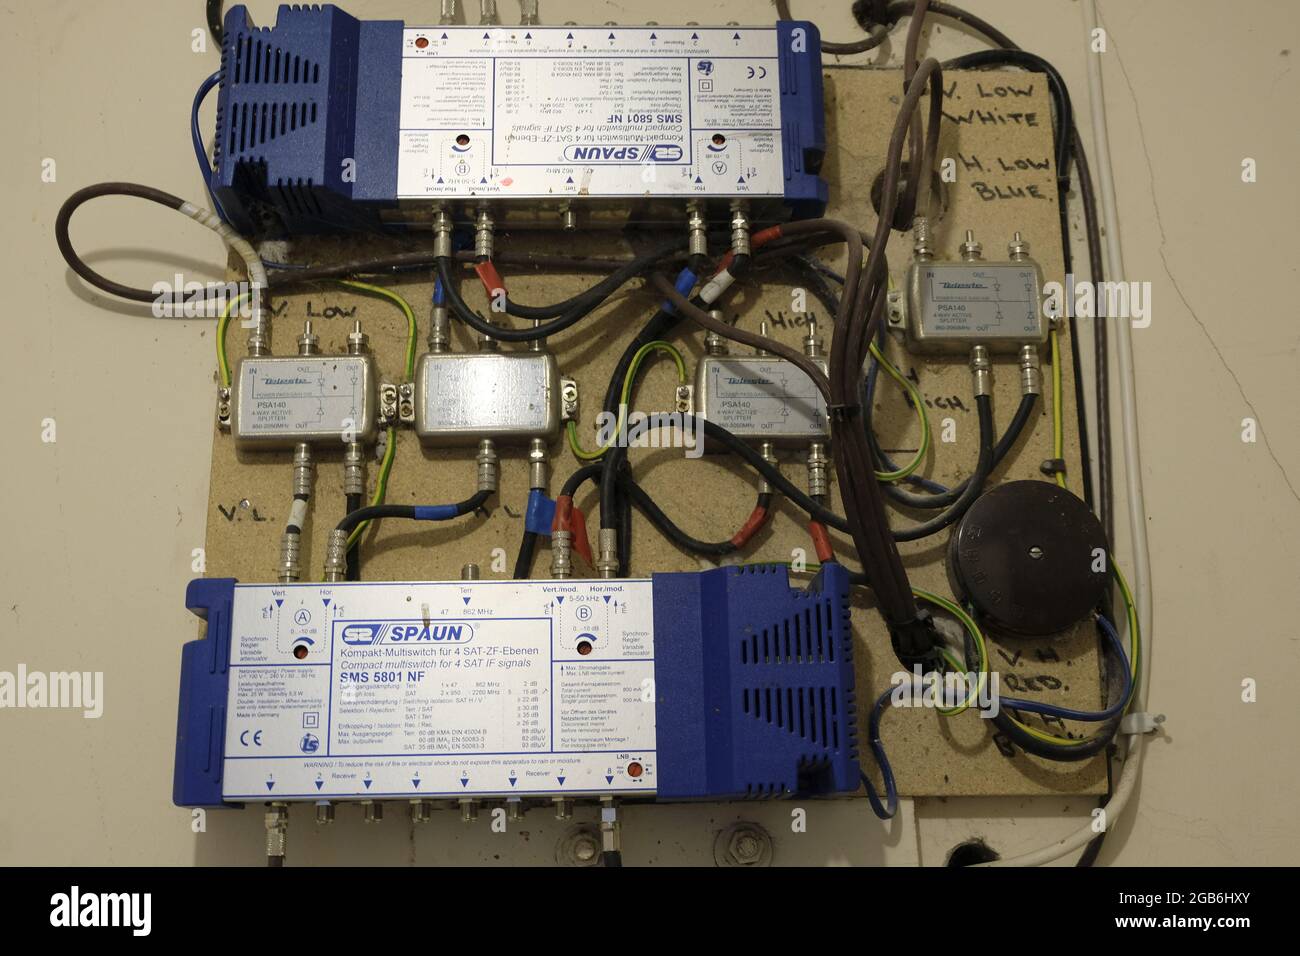 Complicated lighting circuit board for a block of flats in the UK Stock Photo